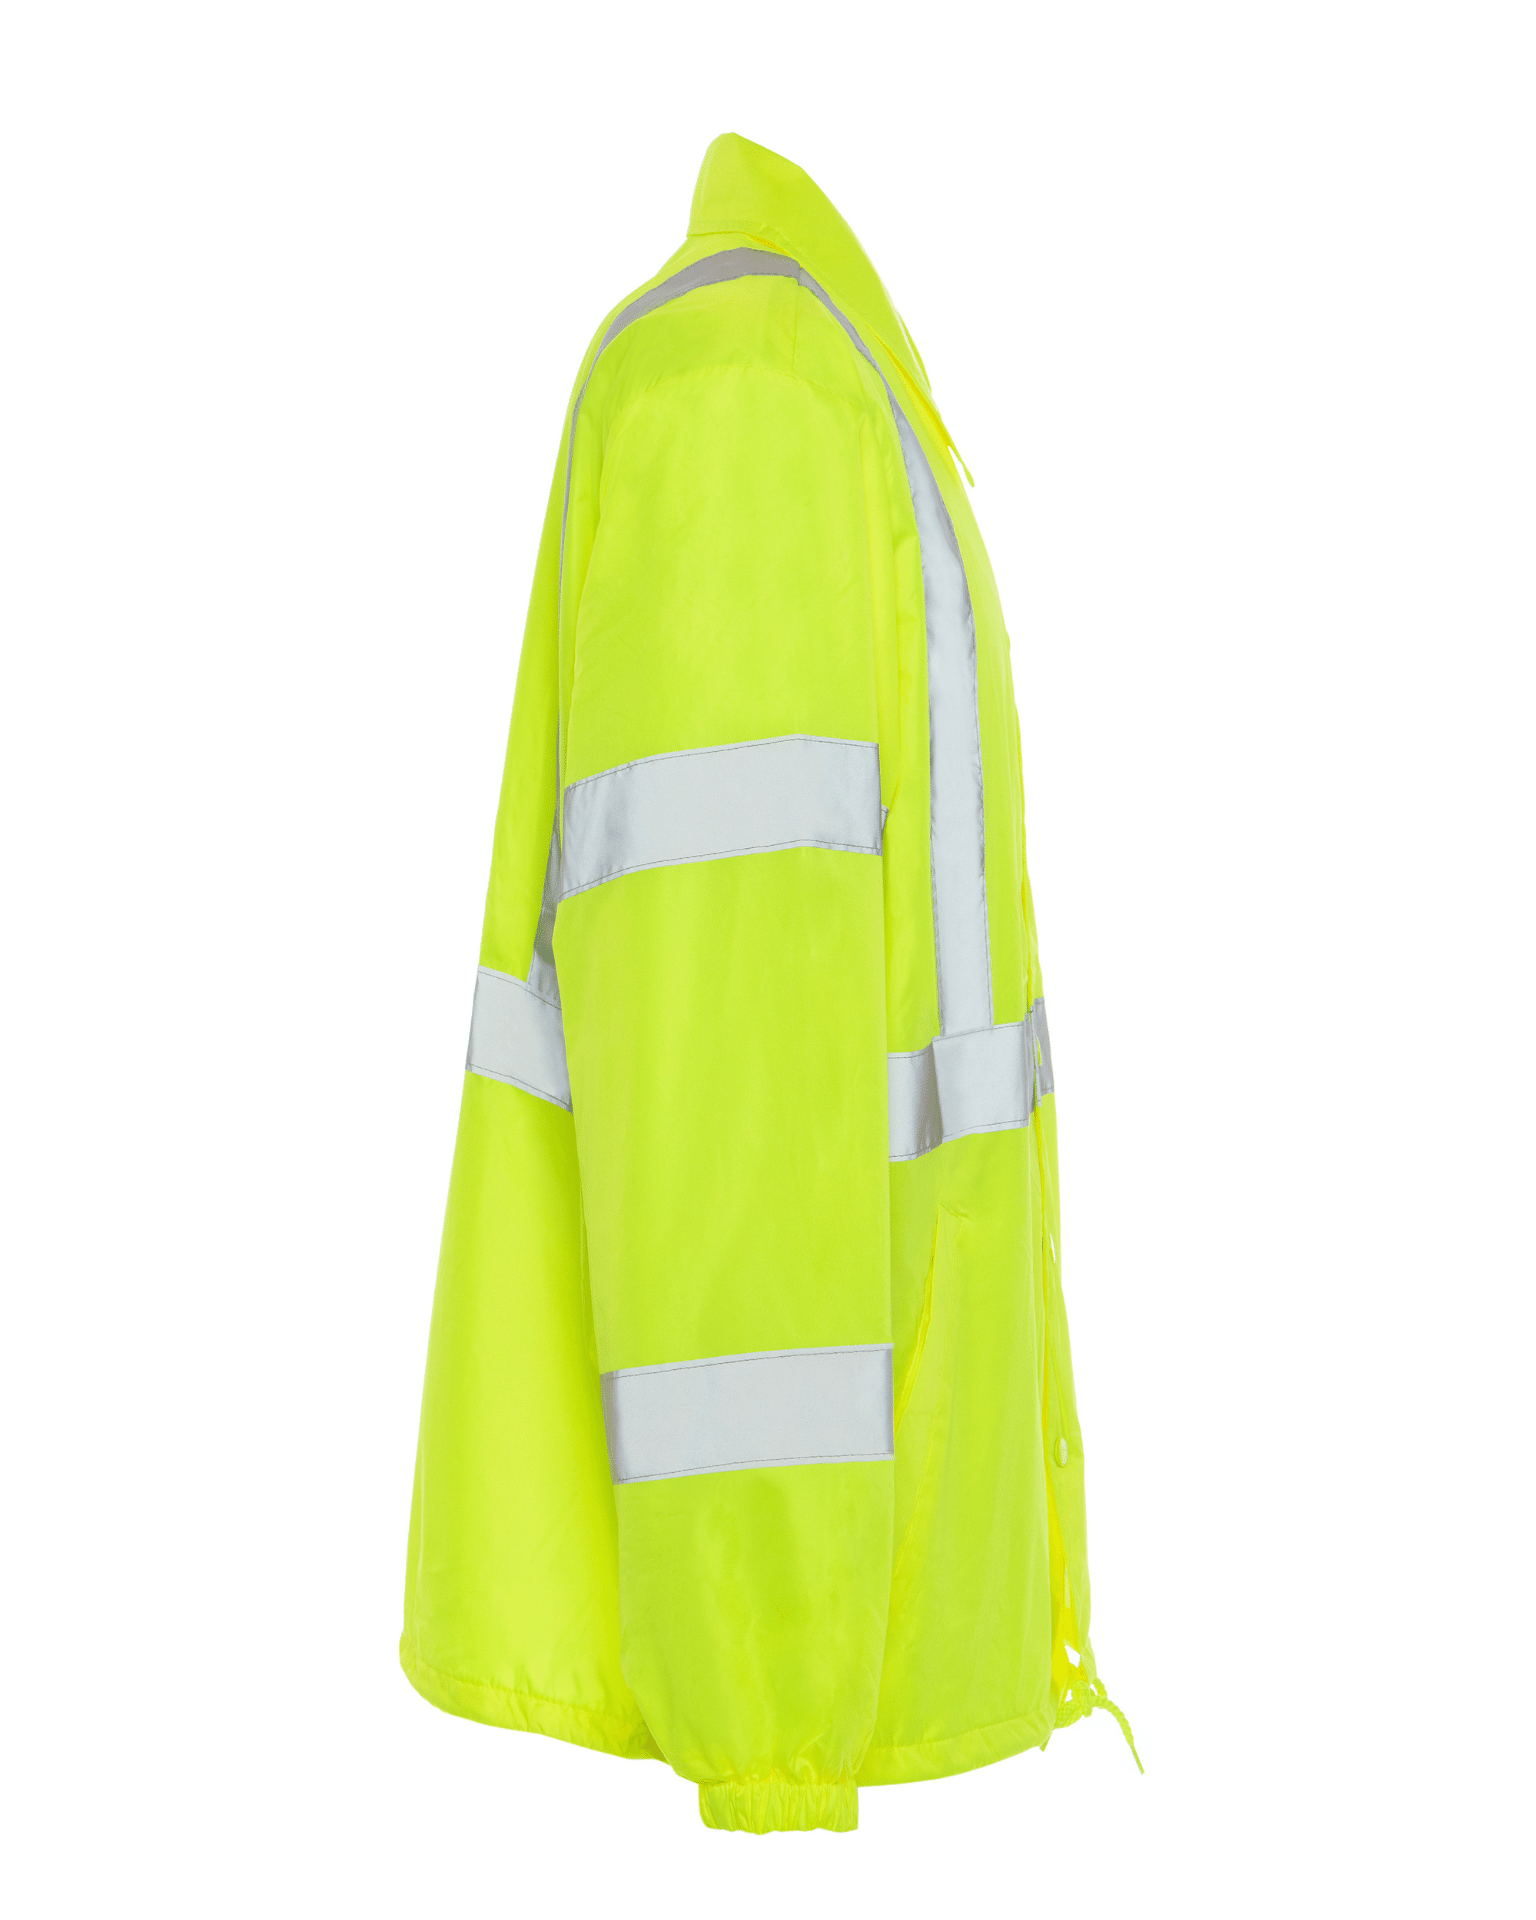 ANSI Class 2 High Visibility fleece lined teflon treated polyester windbreaker jacket by Utility Pro